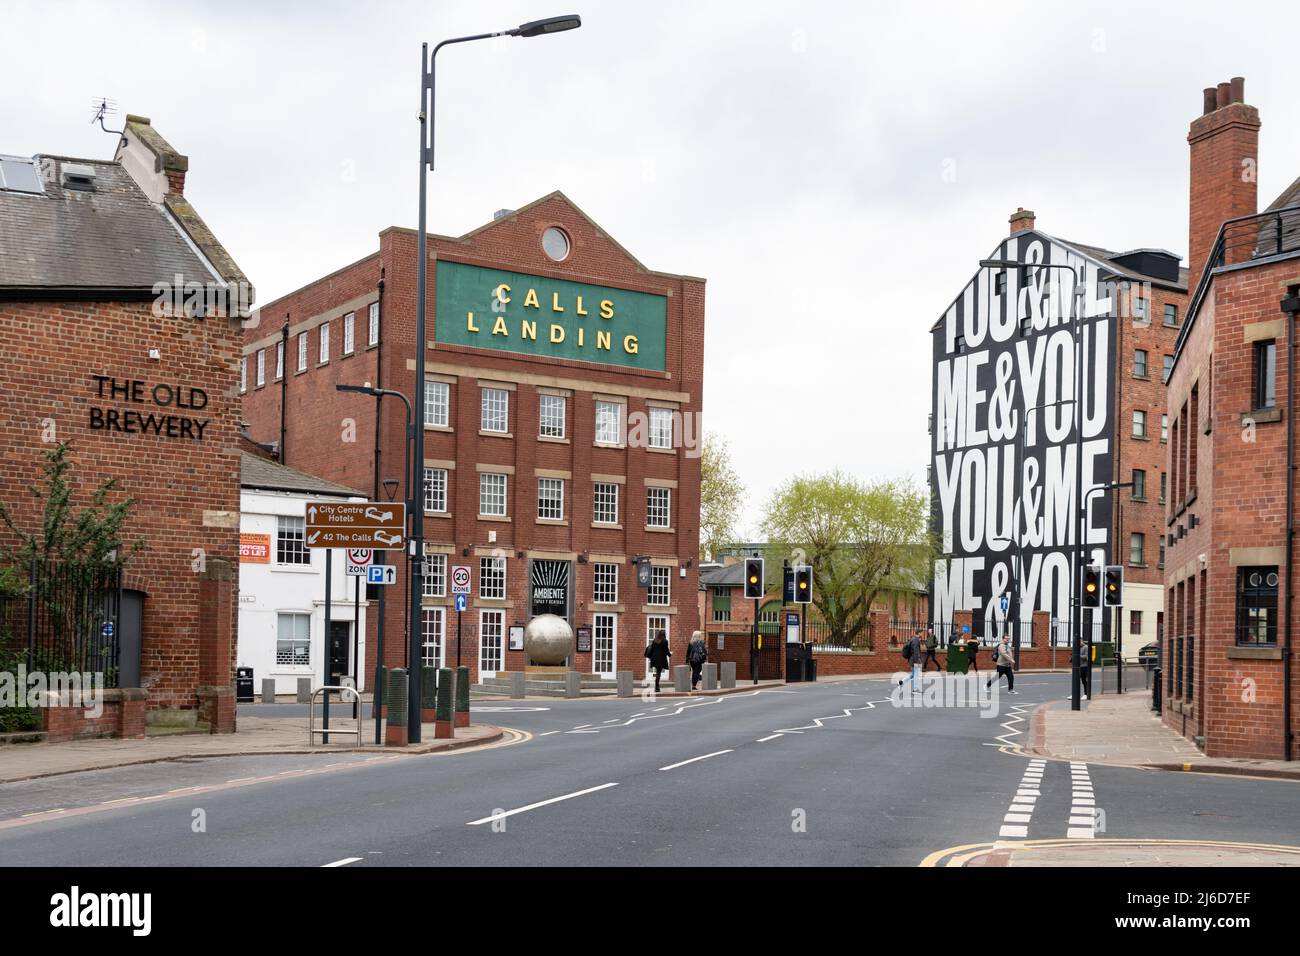 The Calls, Leeds - The Old Brewery, Calls Landing et You and Me, Me & You fresque d'Anthony Burrill et In Good Company, The Calls, Leeds, Angleterre, Royaume-Uni Banque D'Images